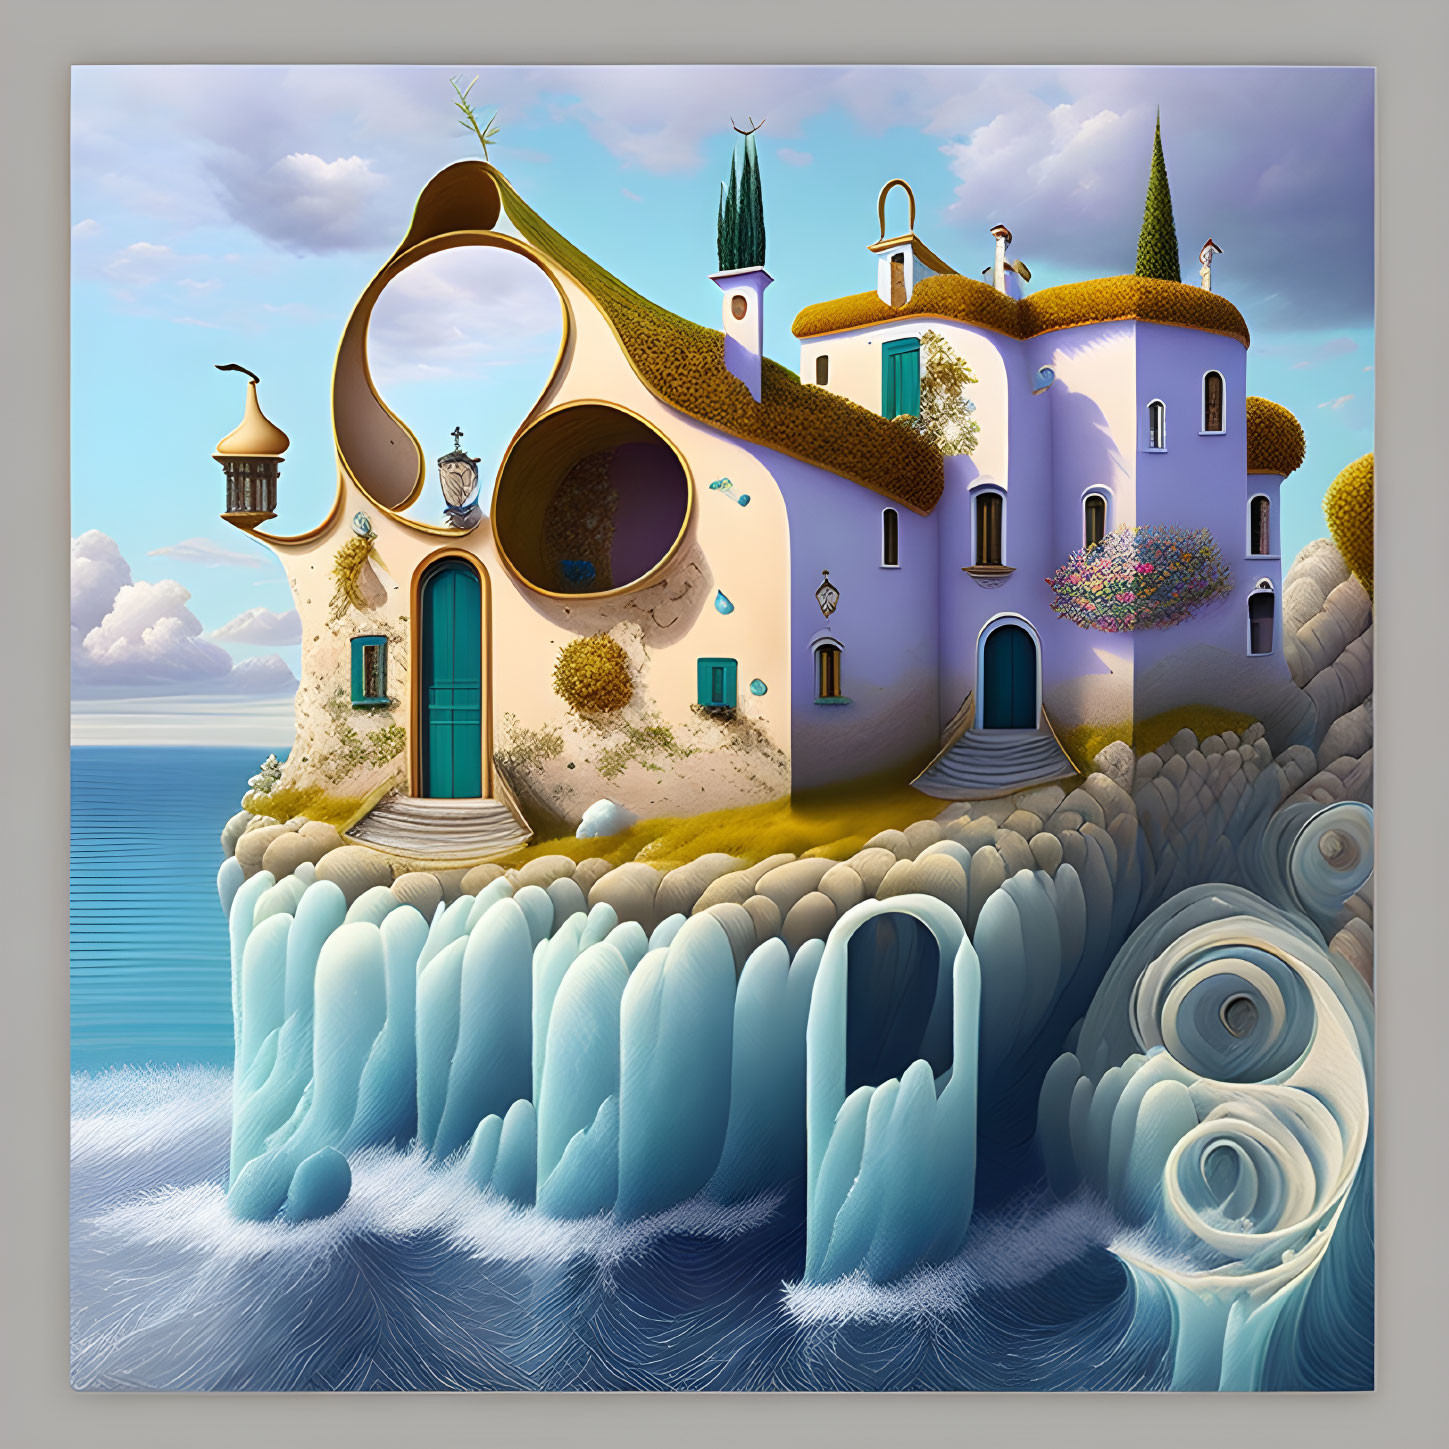 Surreal artwork of whimsical building on cliff with organic shapes and lush greenery.